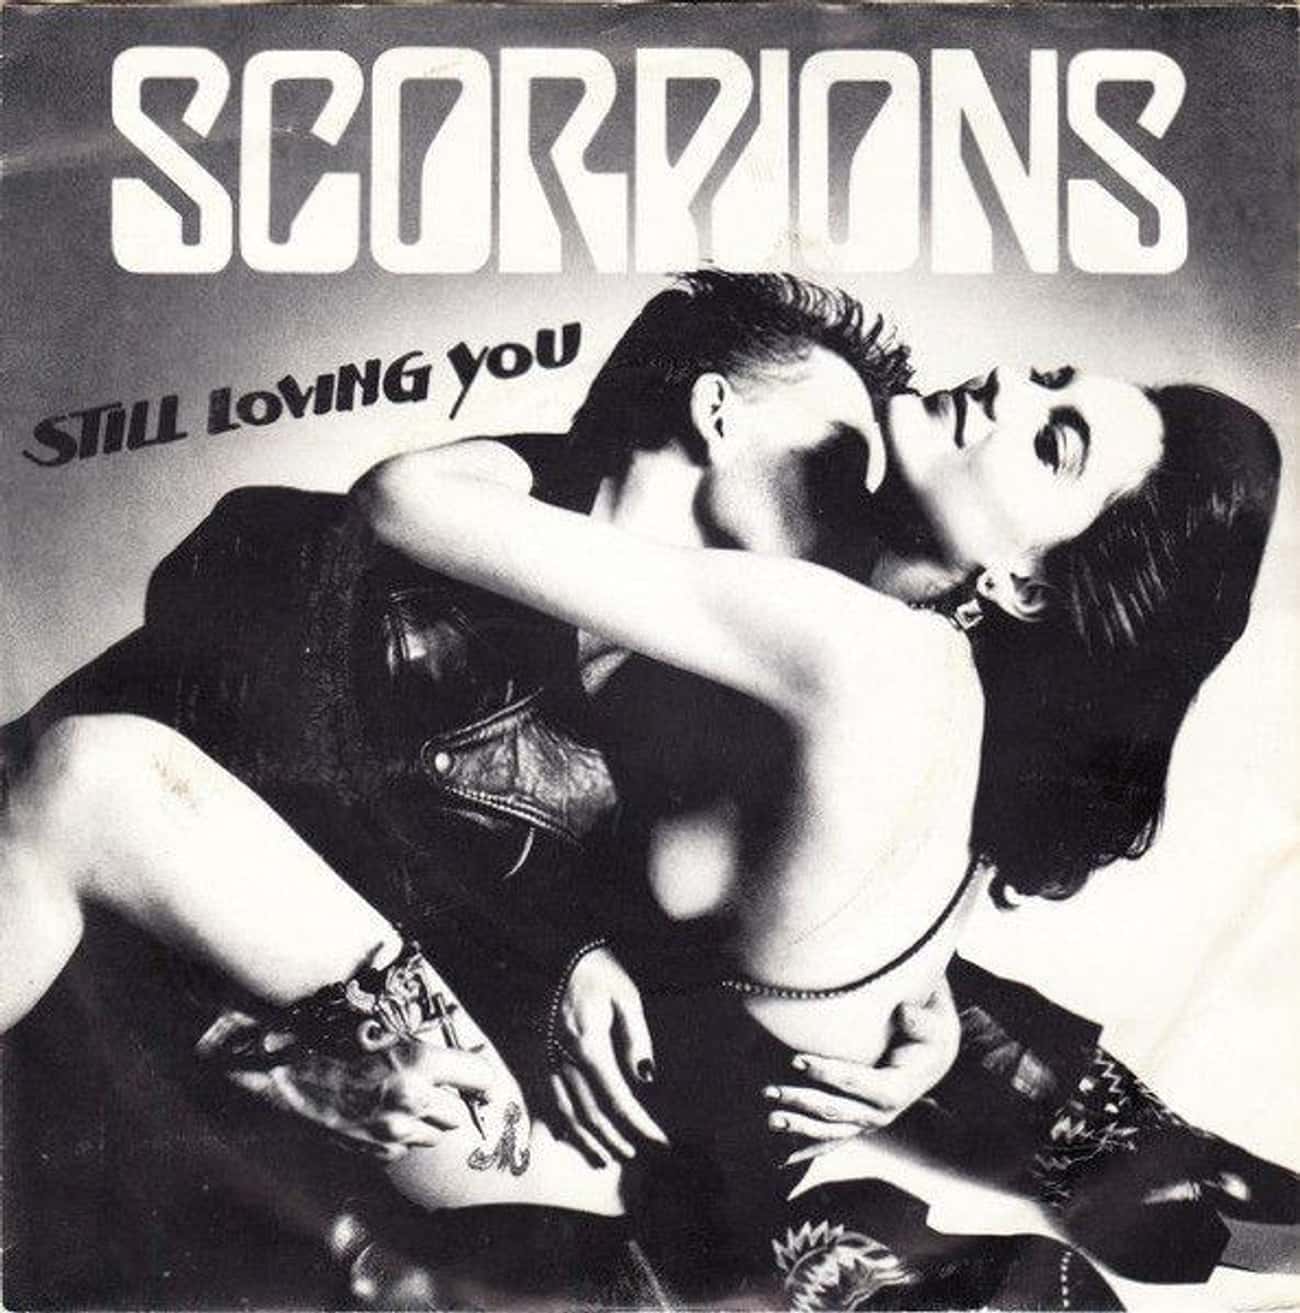 'Still Loving You' By Scorpions